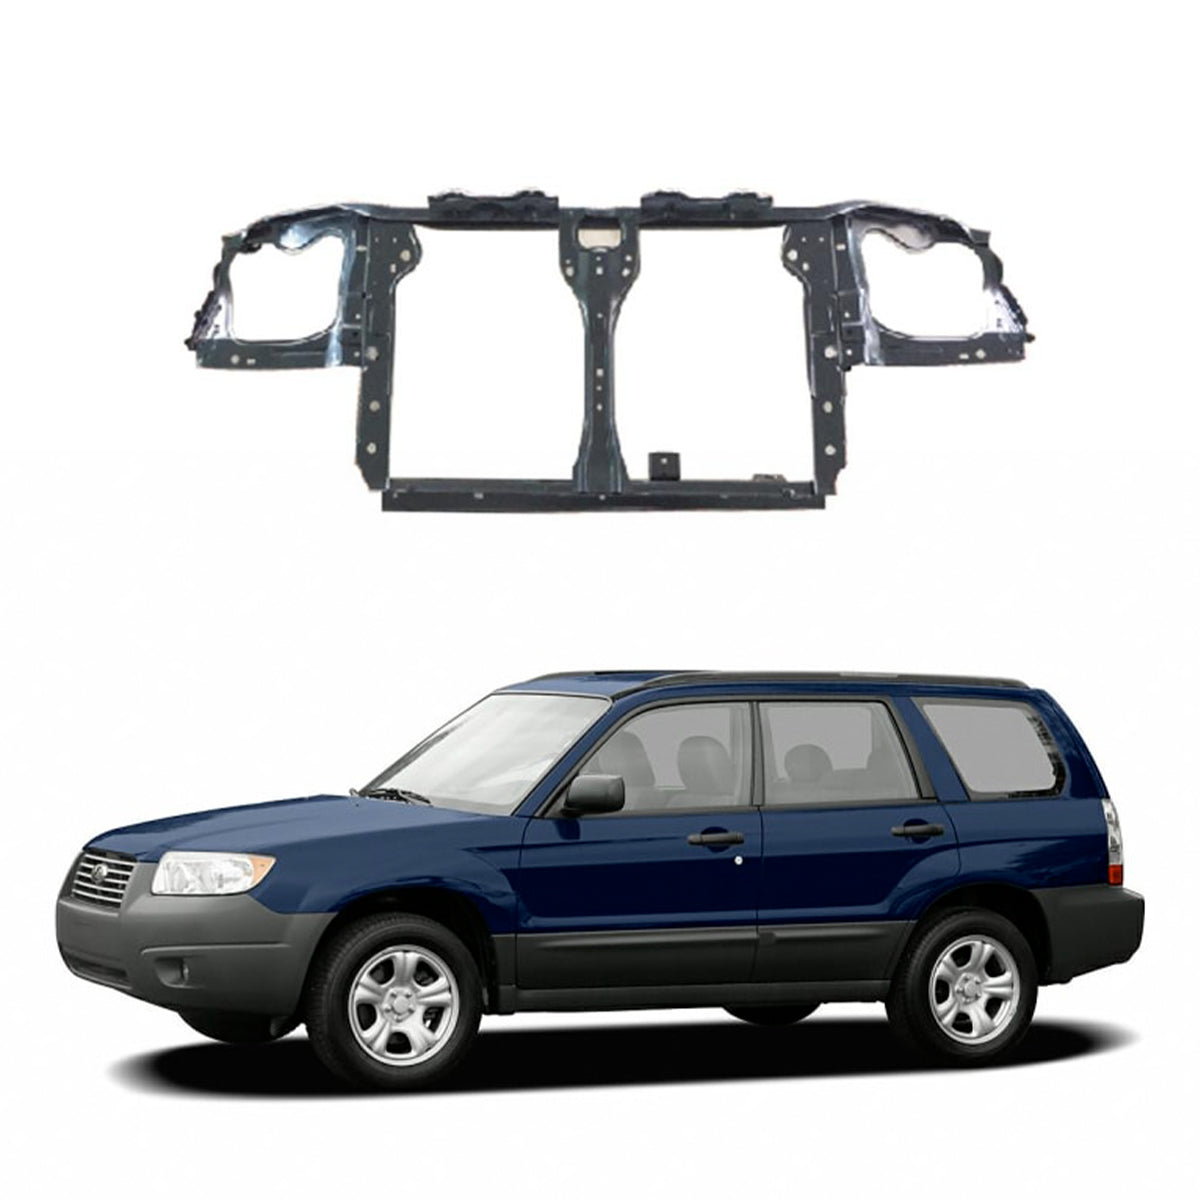 Replacement RADIATOR SUPPORT, 2006-2008 Subaru Forester, (Steel)